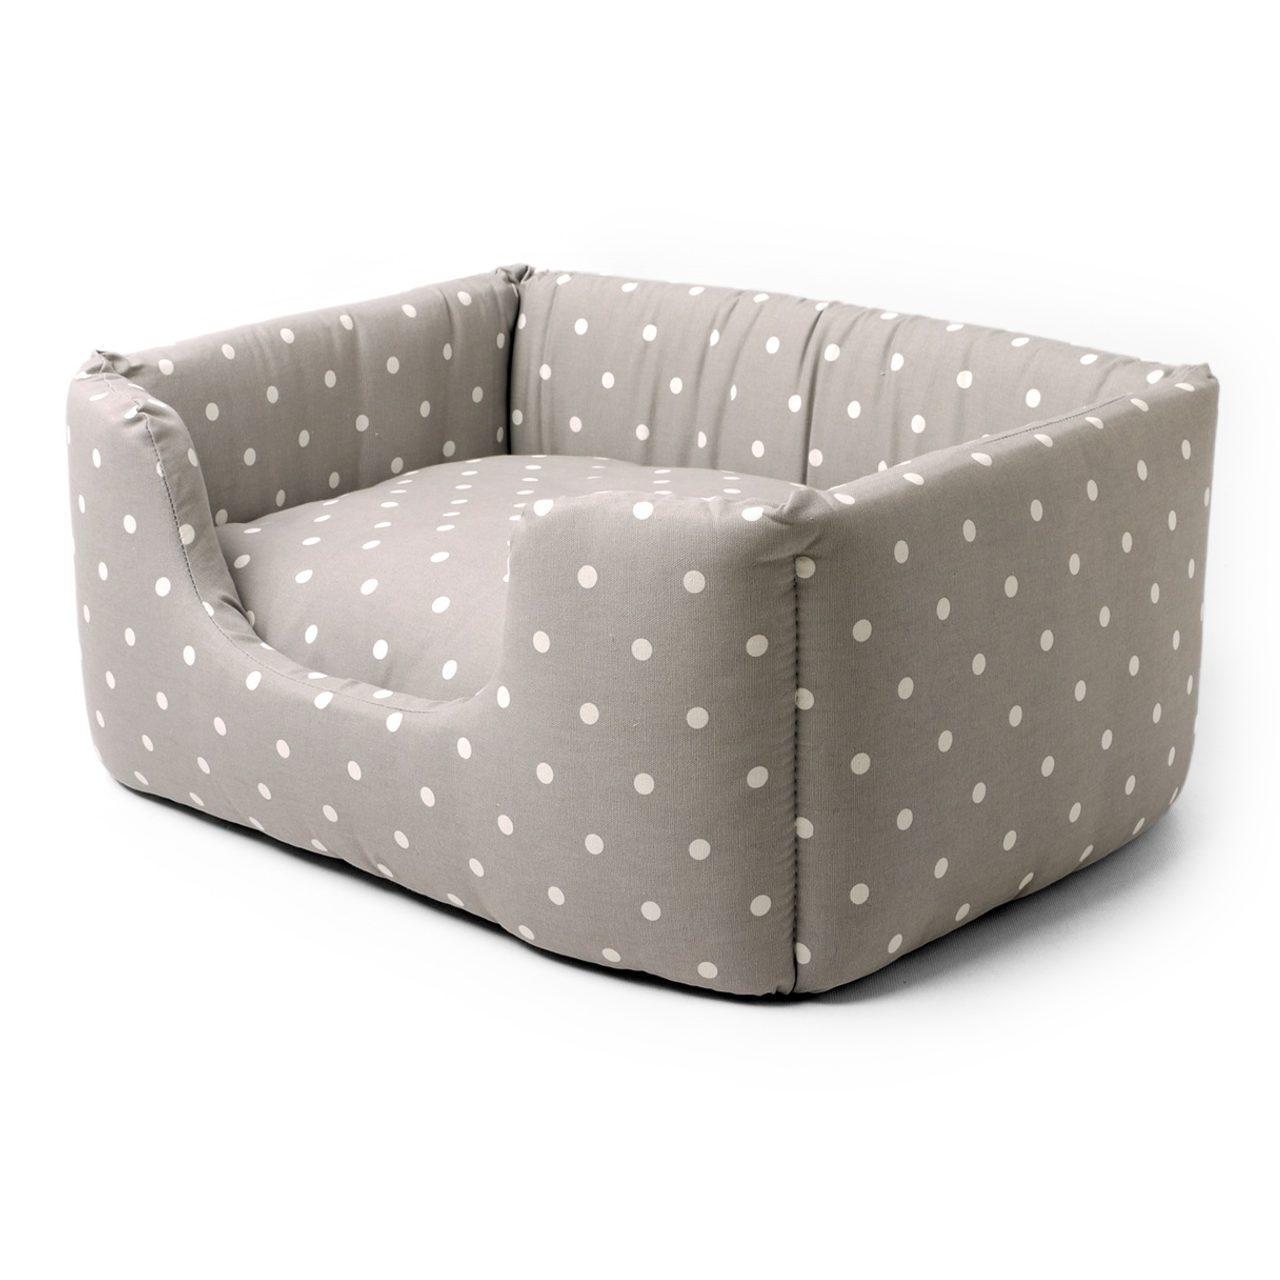 An image of Charley Chau Deeply Dishy Bed Cotton Print Dotty Grey Small